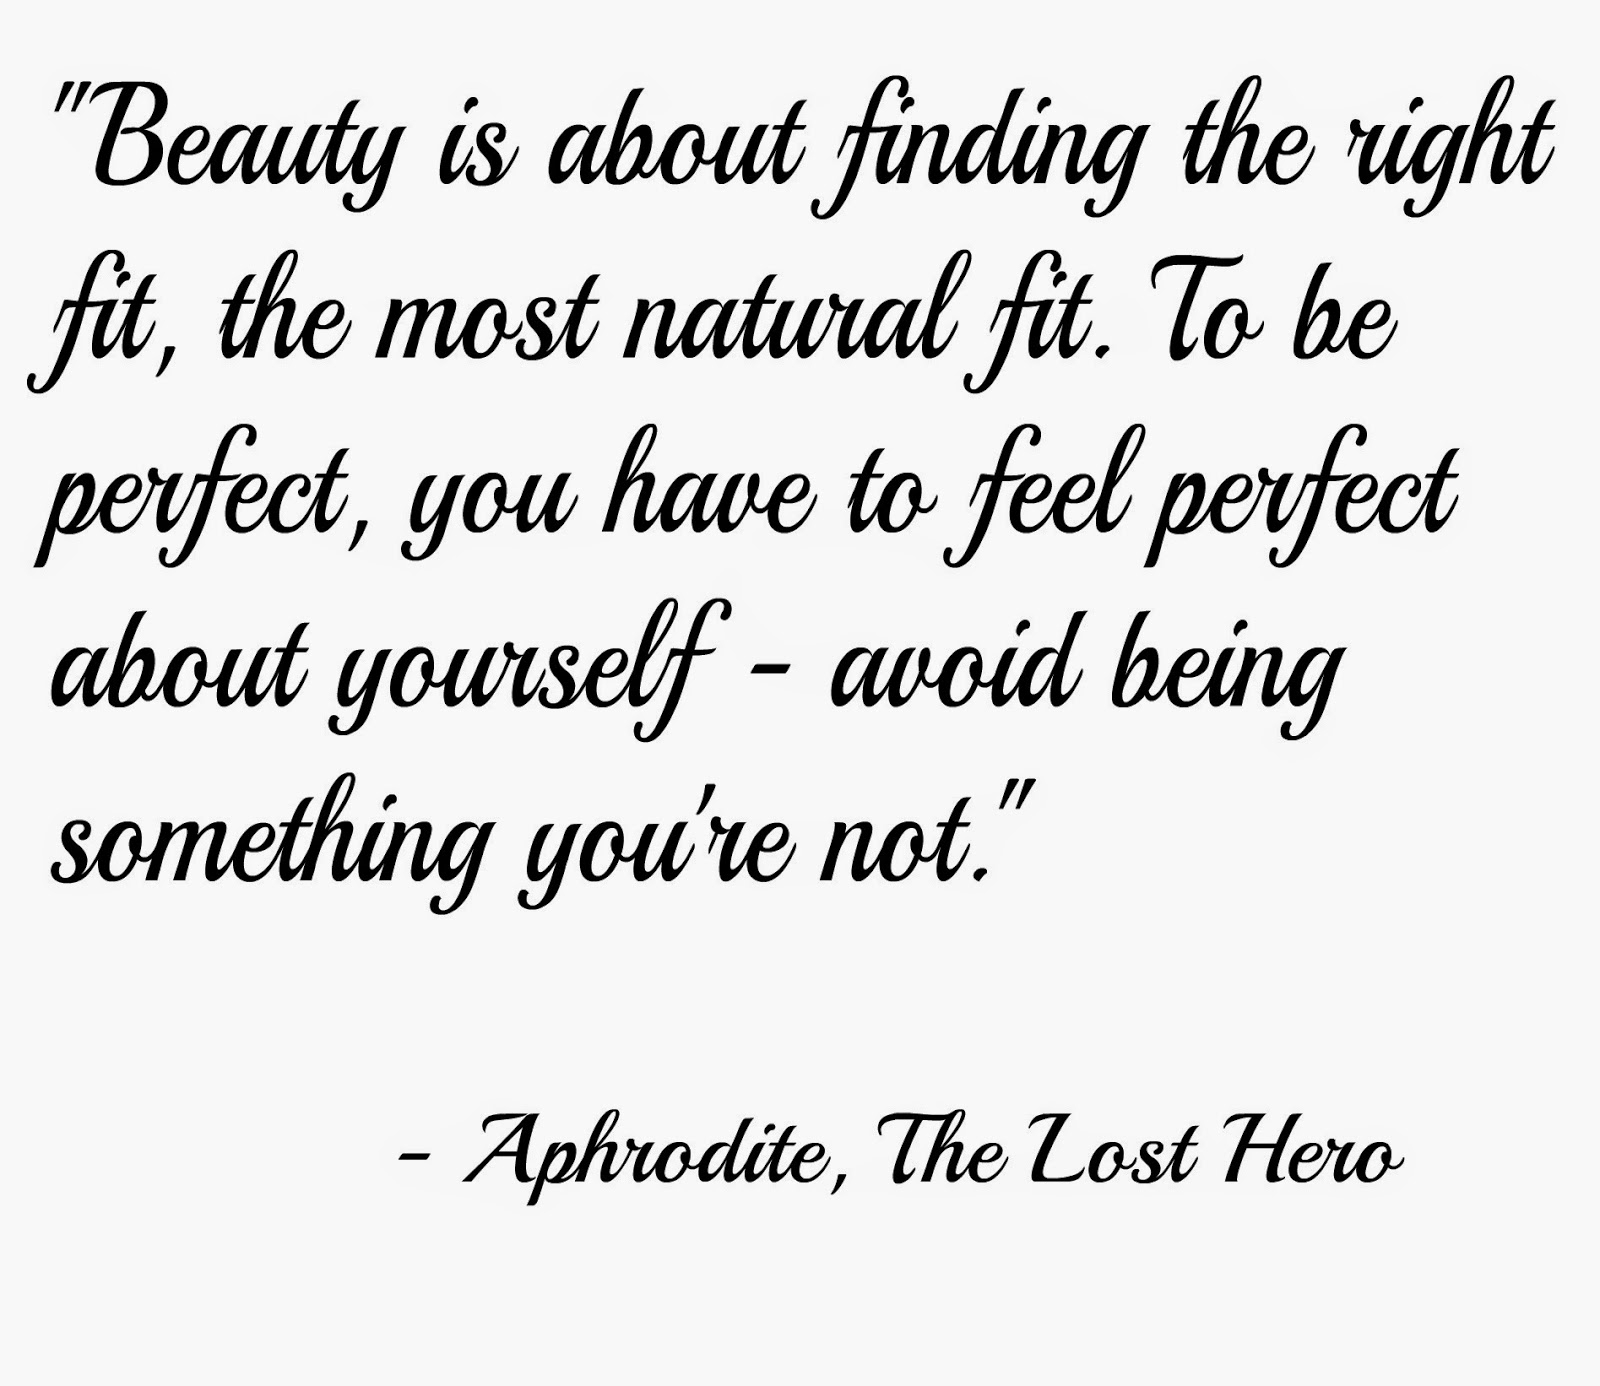 Beauty is about finding the right fit, the most natural fit, To be perfect, you have to feel perfect about yourself - avoid trying to be something you're not. Aphrodite, The Lost Hero